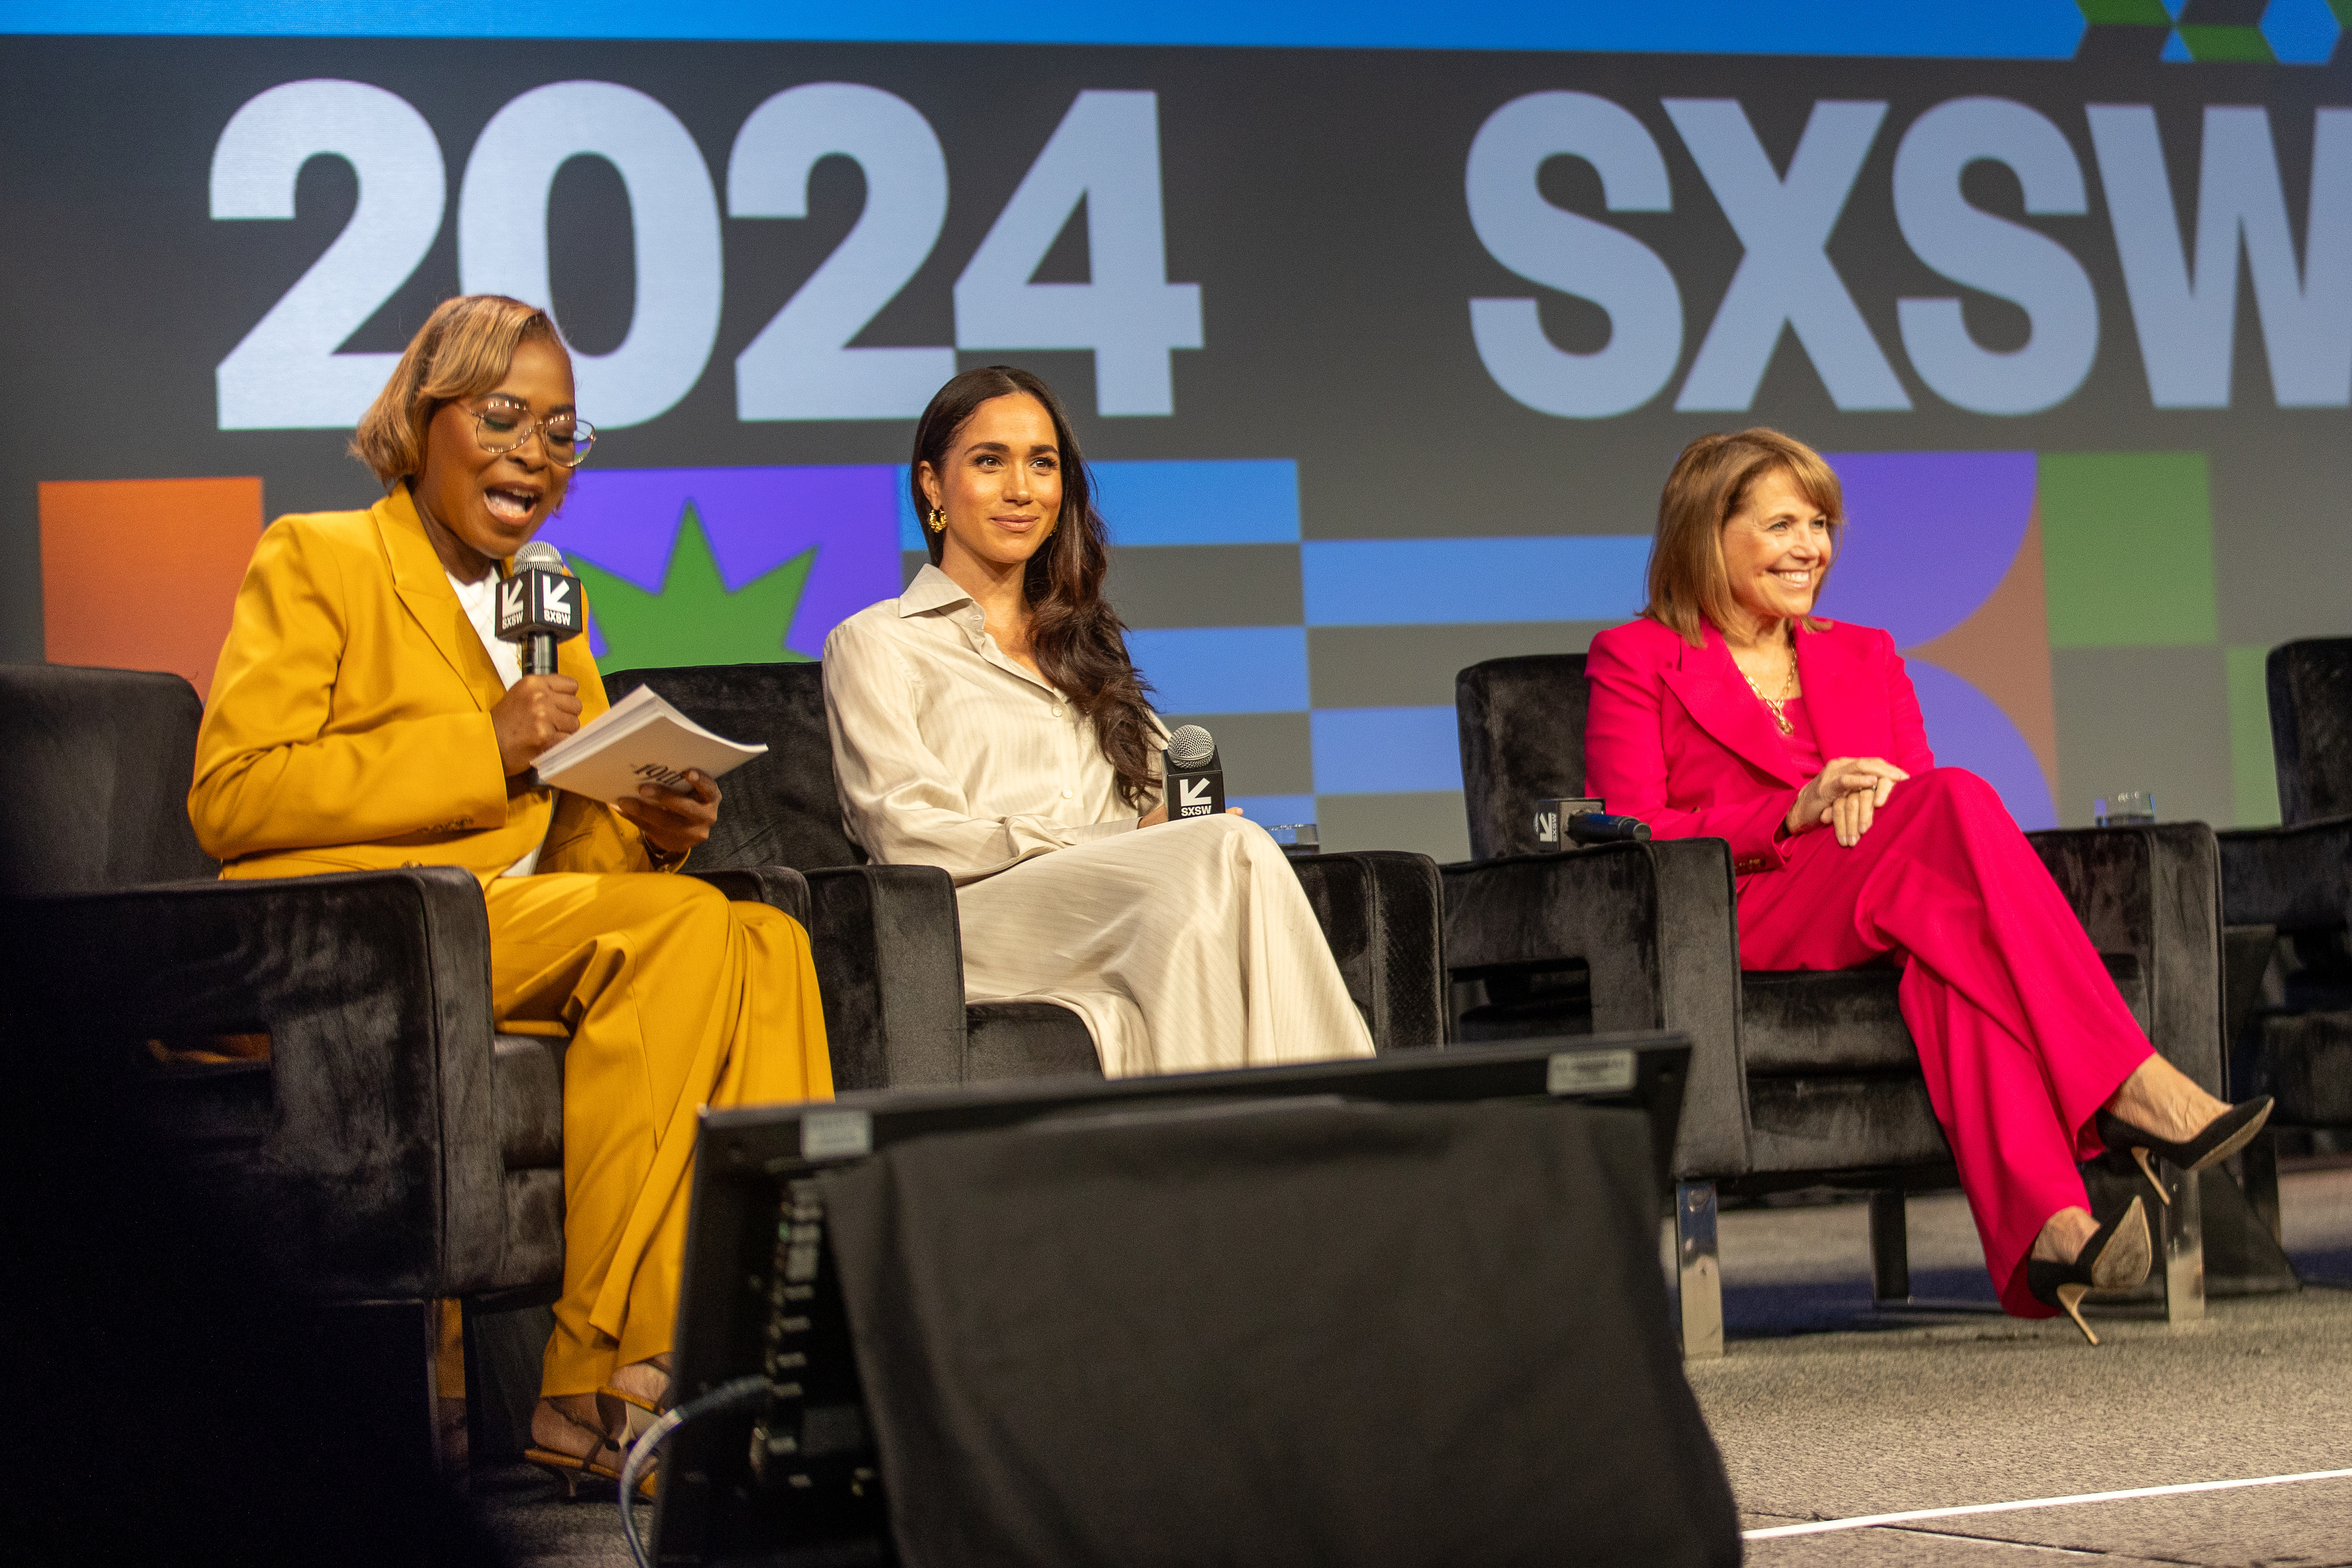 Errin Haine, Meghan Markle, and Katie Couric at the "Breaking Barriers, Shaping Narratives: How Women Lead On and Off the Screen" panel during the 2024 SXSW Conference and Festival at Austin Convention Center on March 8, 2024 in Austin, Texas. | Source: Getty Images